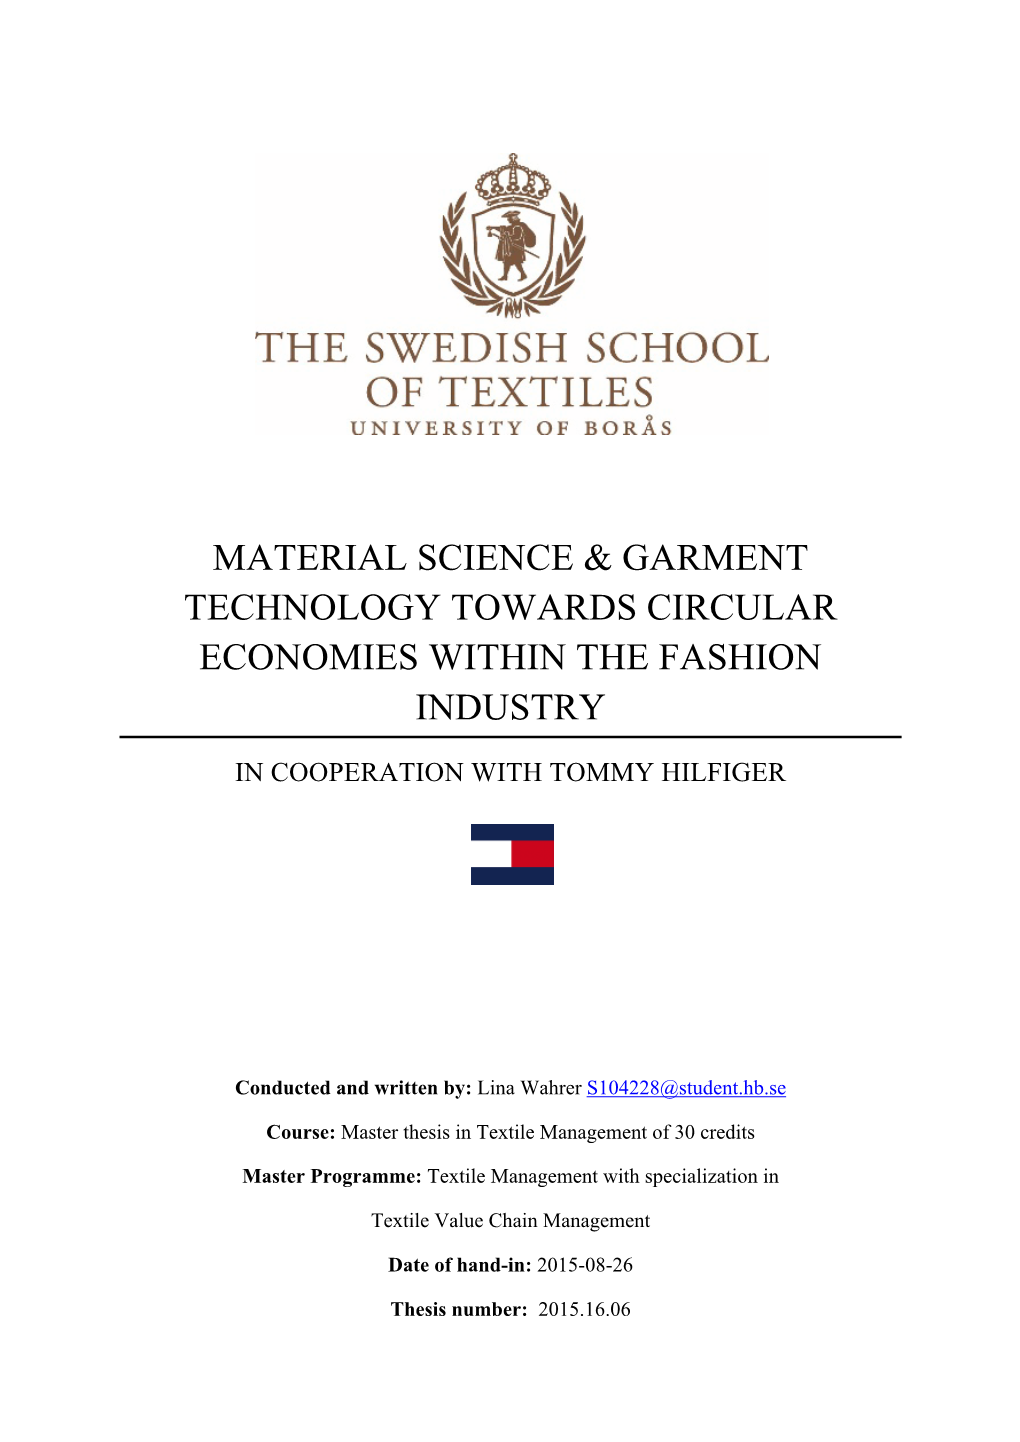 Material Science & Garment Technology Towards